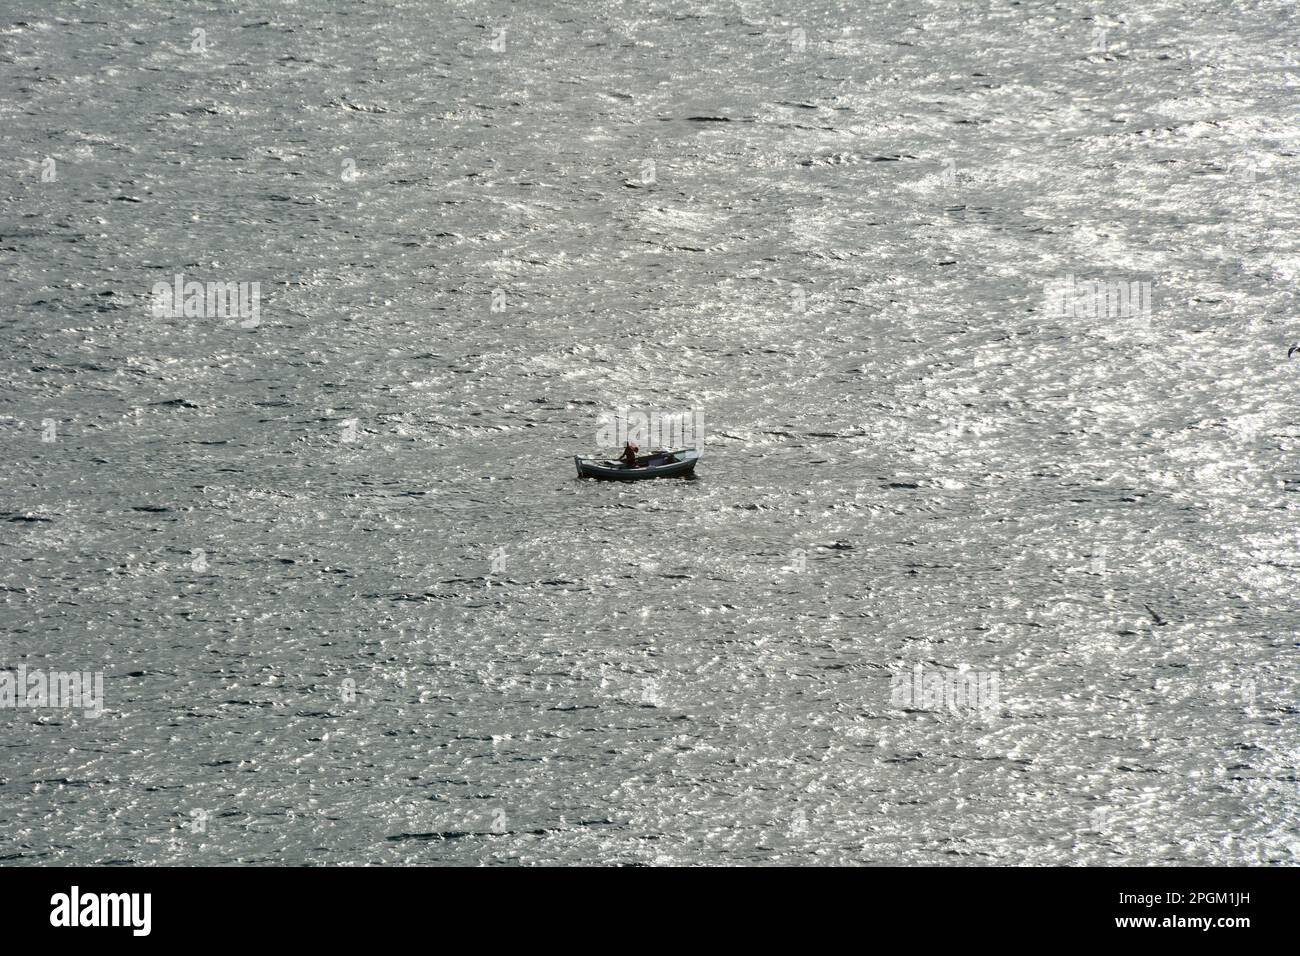 A lone traditional fisherman fishing in a rowboat in the Strait of Bosphorus off the coast of Istanbul, Turkey / Turkiye. Stock Photo